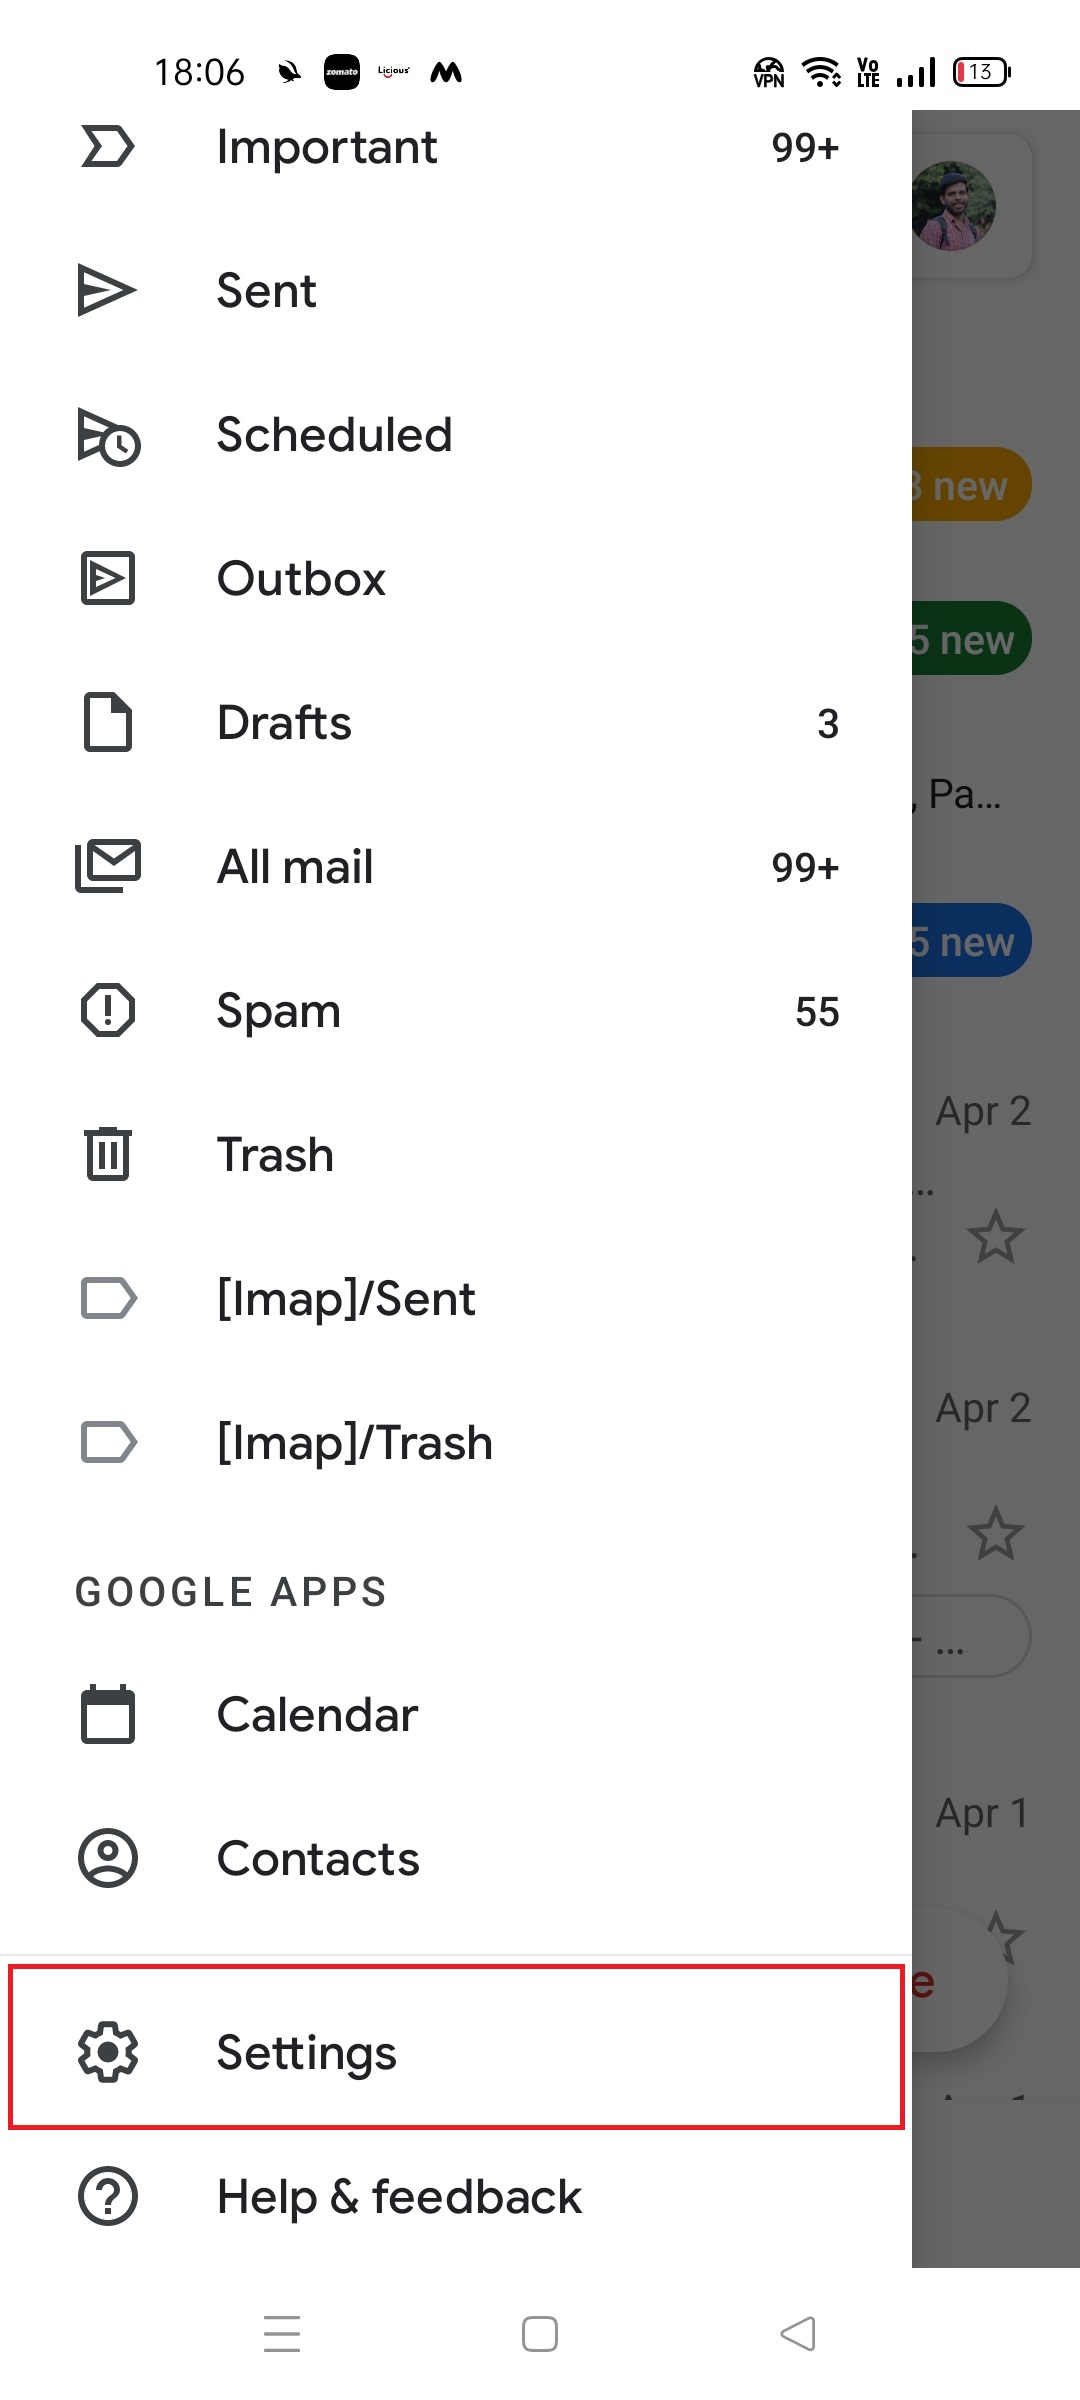 Gmail chat for Google Workspace